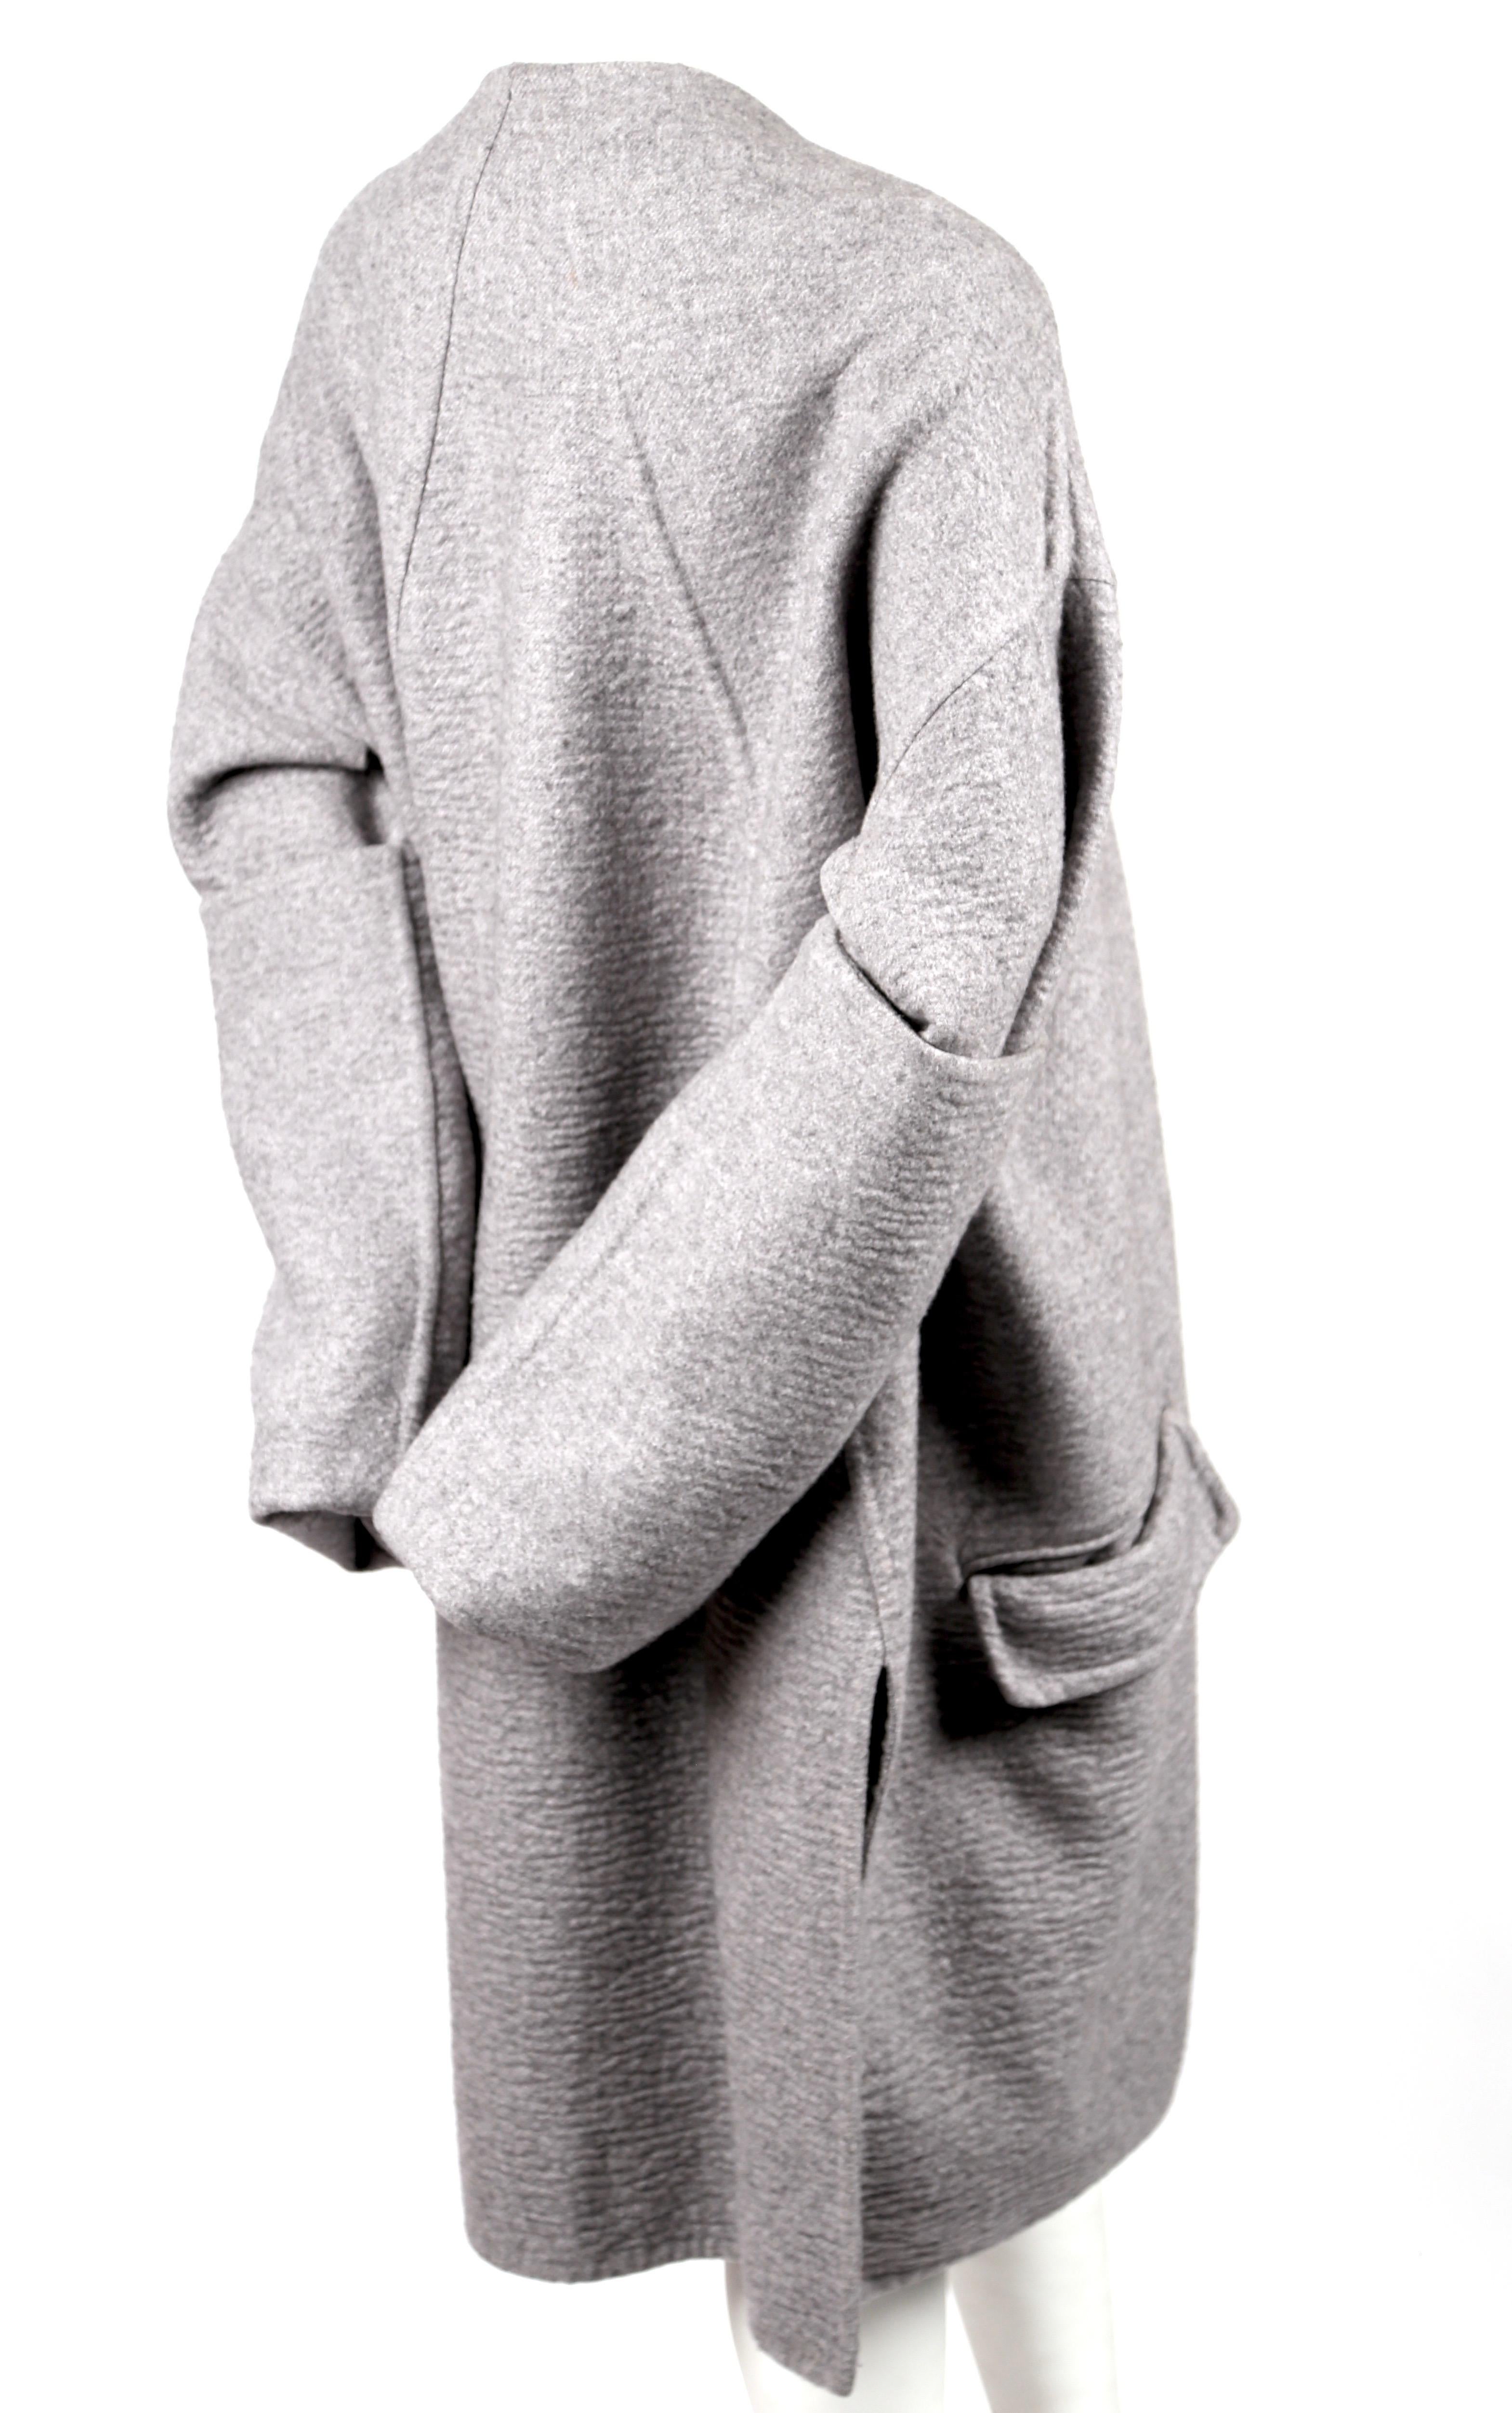 Very rare, grey, double-faced, cashmere coat with exaggerated long sleeves designed by Phoebe Philo for Celine exactly as seen on the runway. Underneath the arms, there are openings to slide arms through so sleeves can be knotted at front as shown